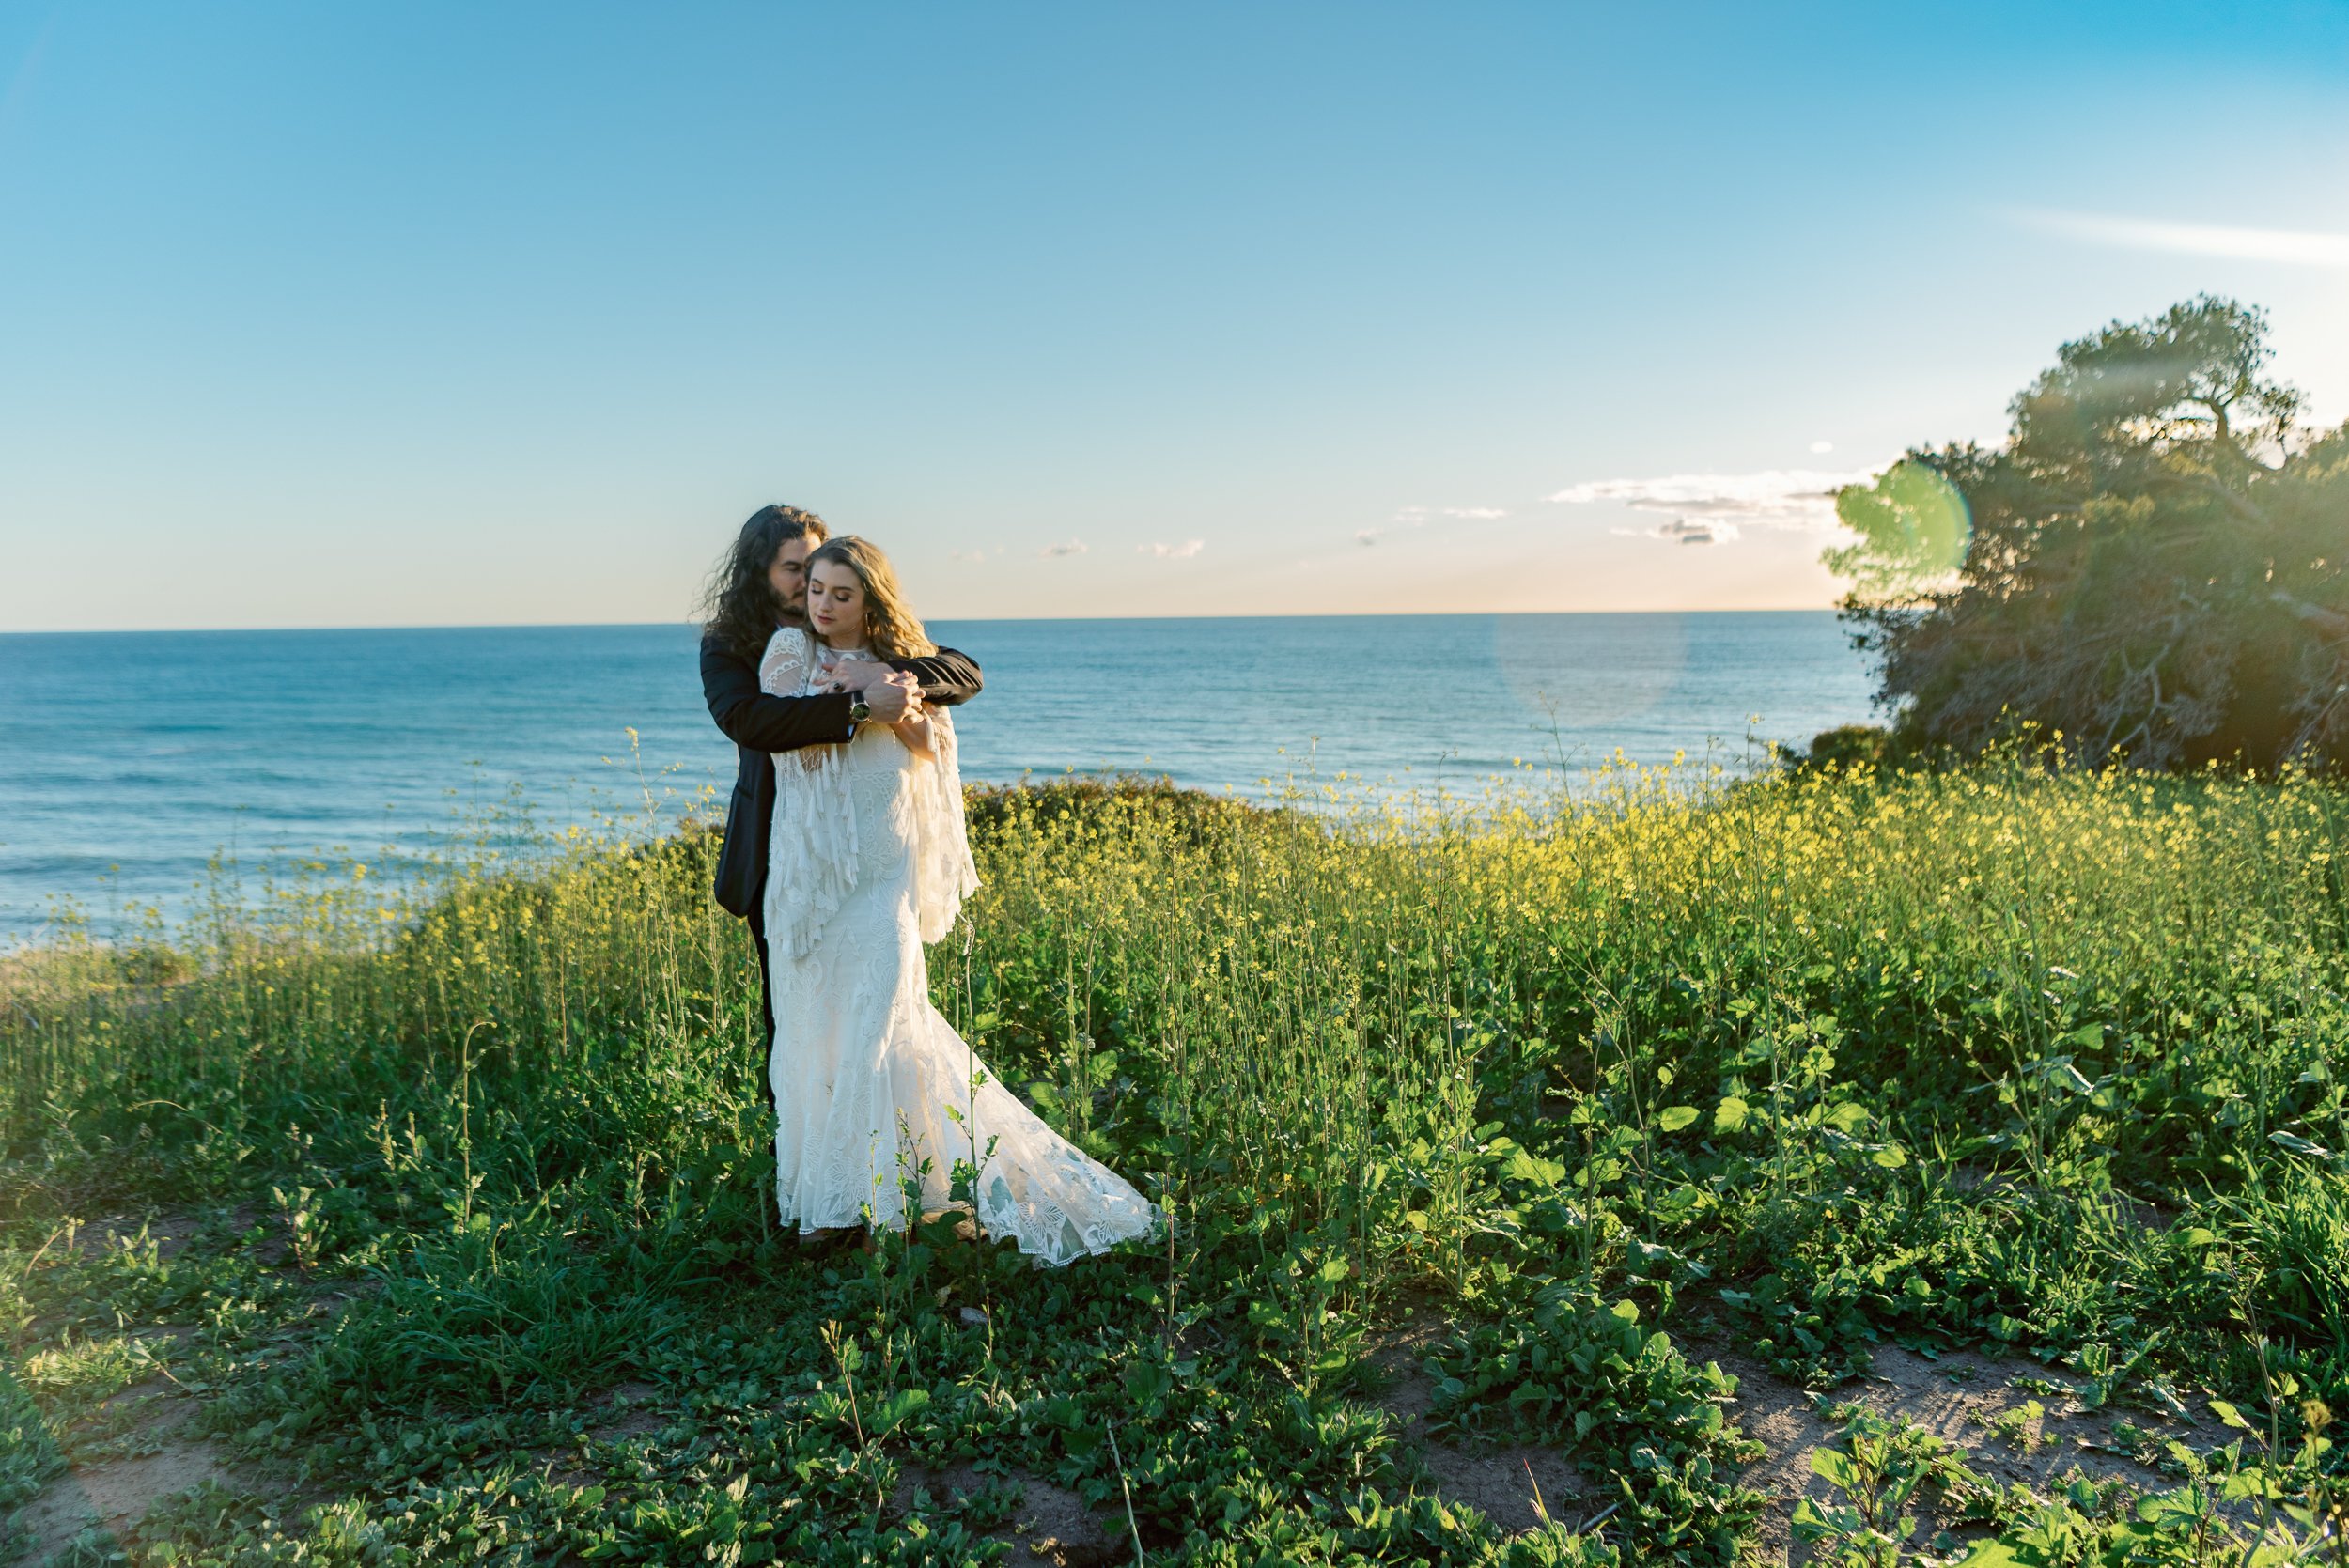 5 reasons to elope: Cliffside elopement with just this couple for an intimate way to start their life together. More and more couples are choosing to elope so the day is truly about their shared connection and what they want their day to be like.